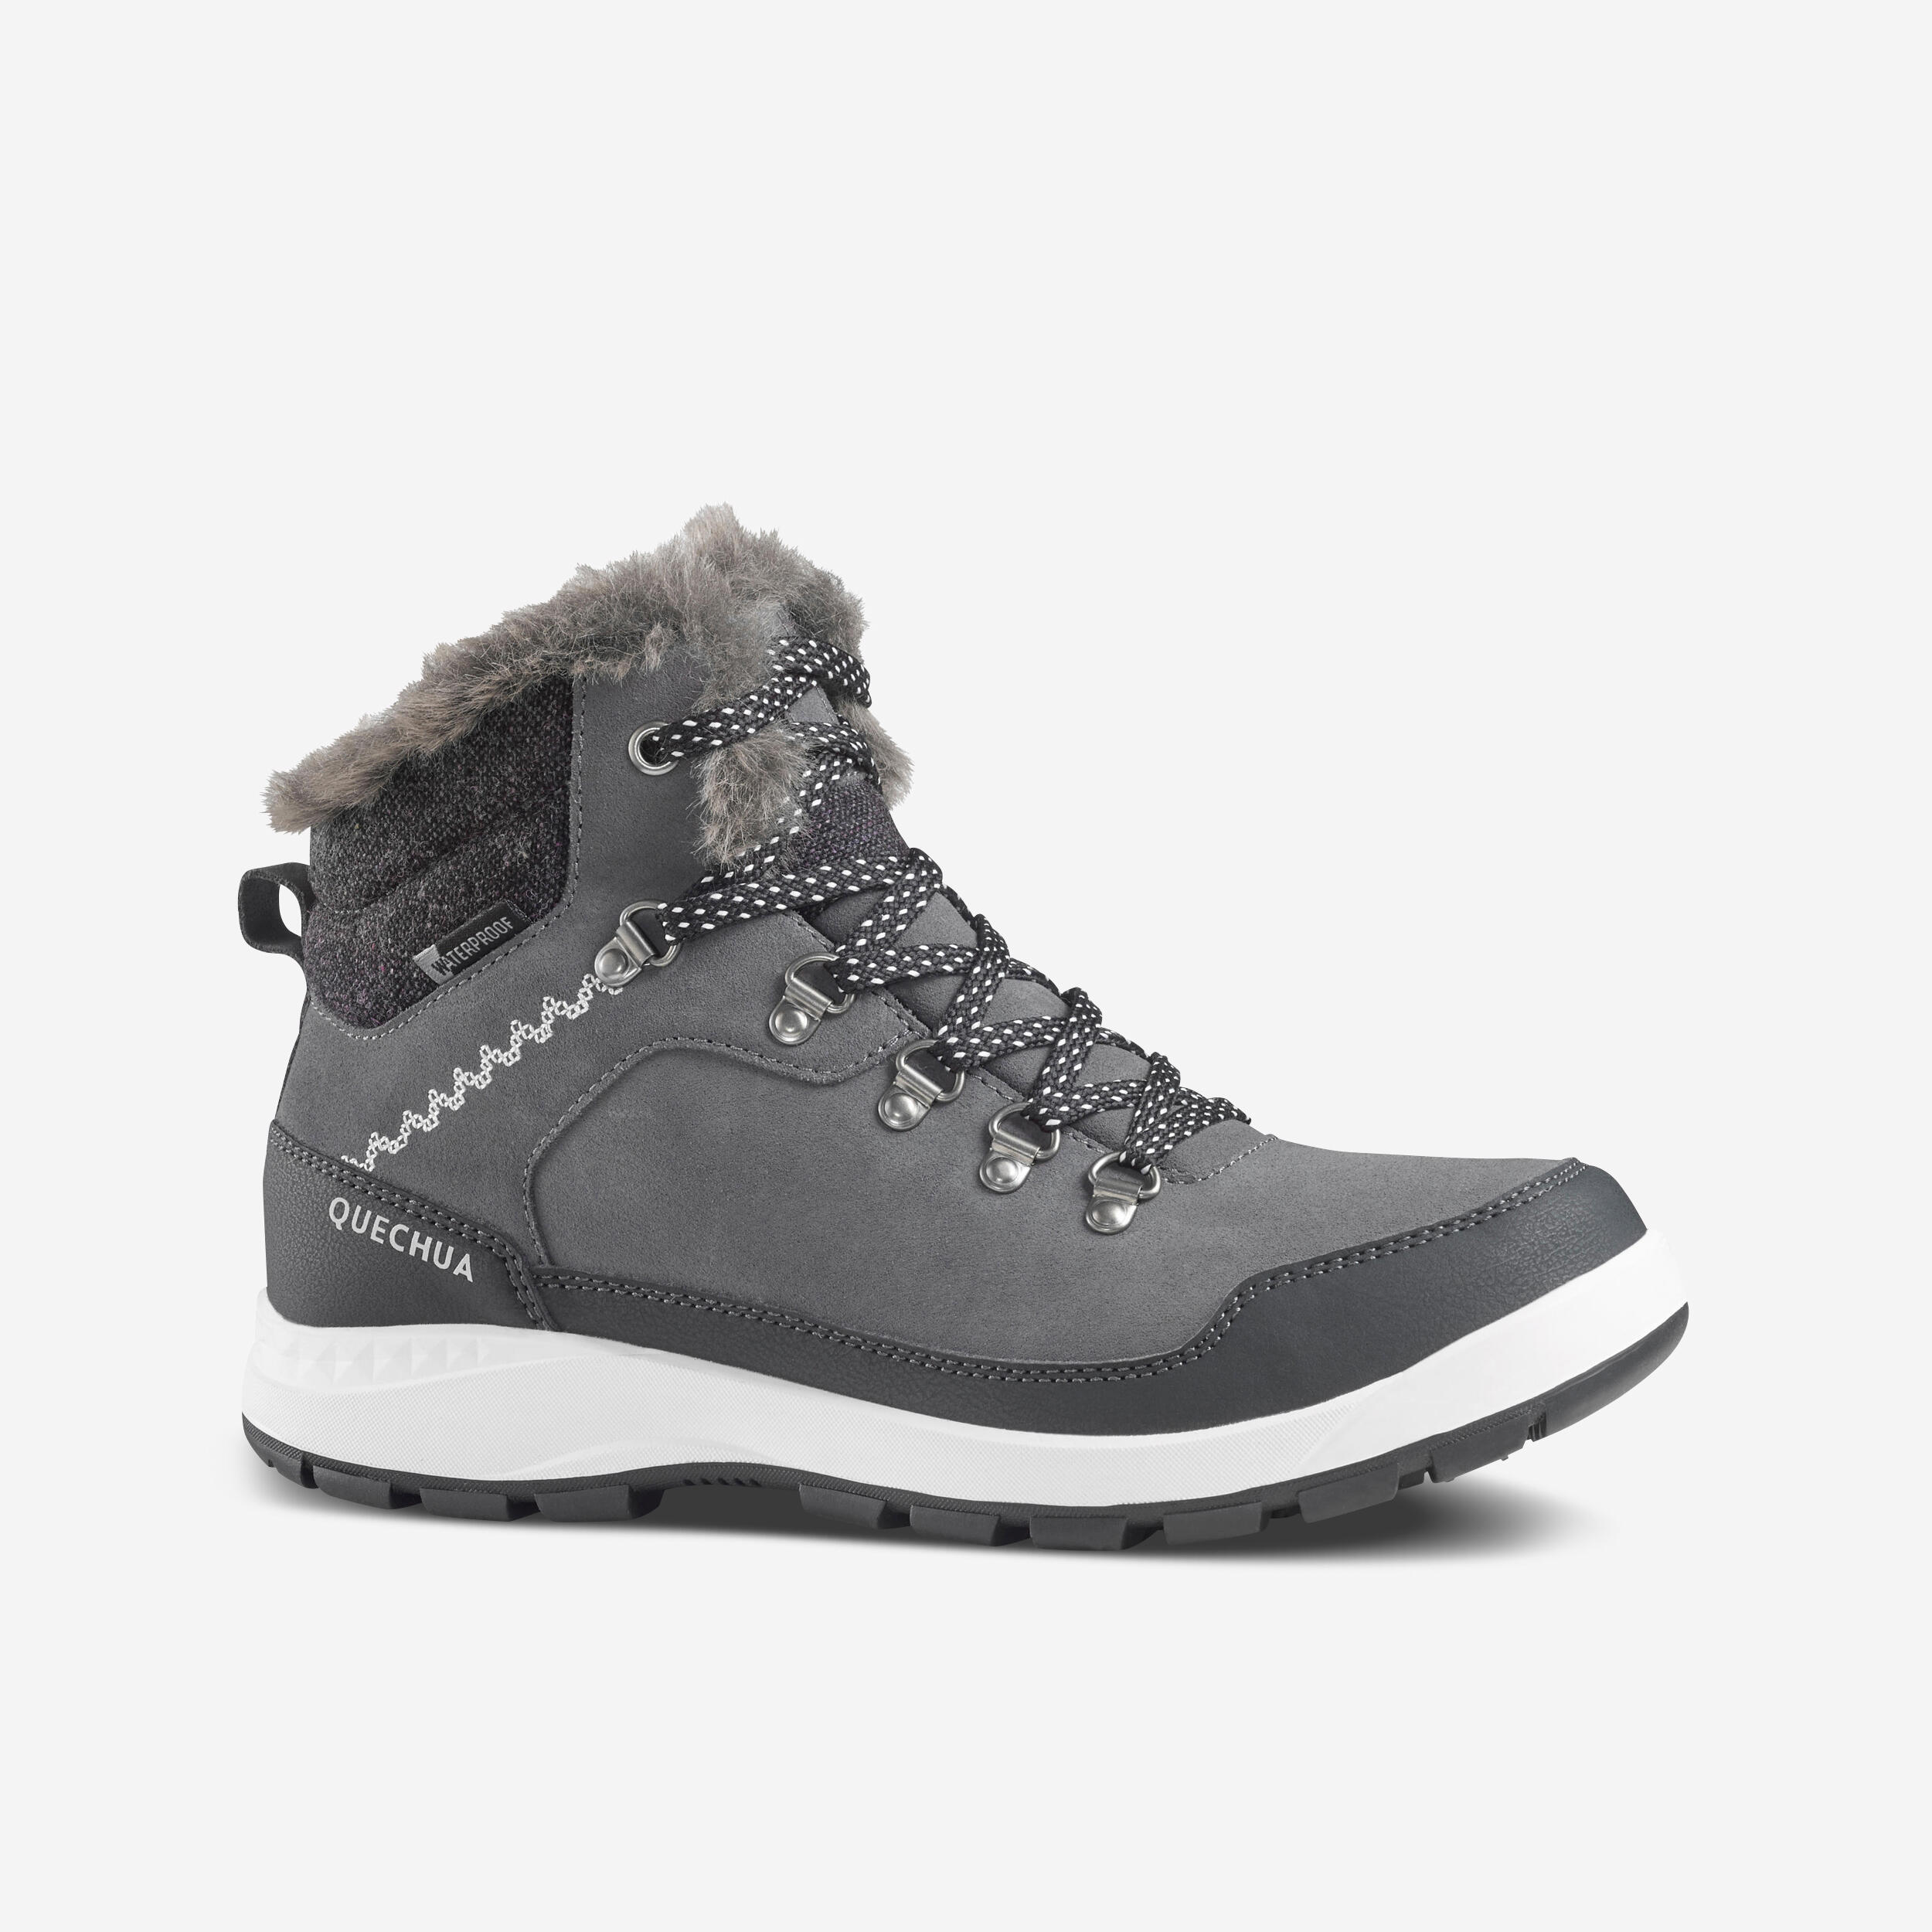 QUECHUA Women’s leather warm waterproof snow boots - SH900 Mid